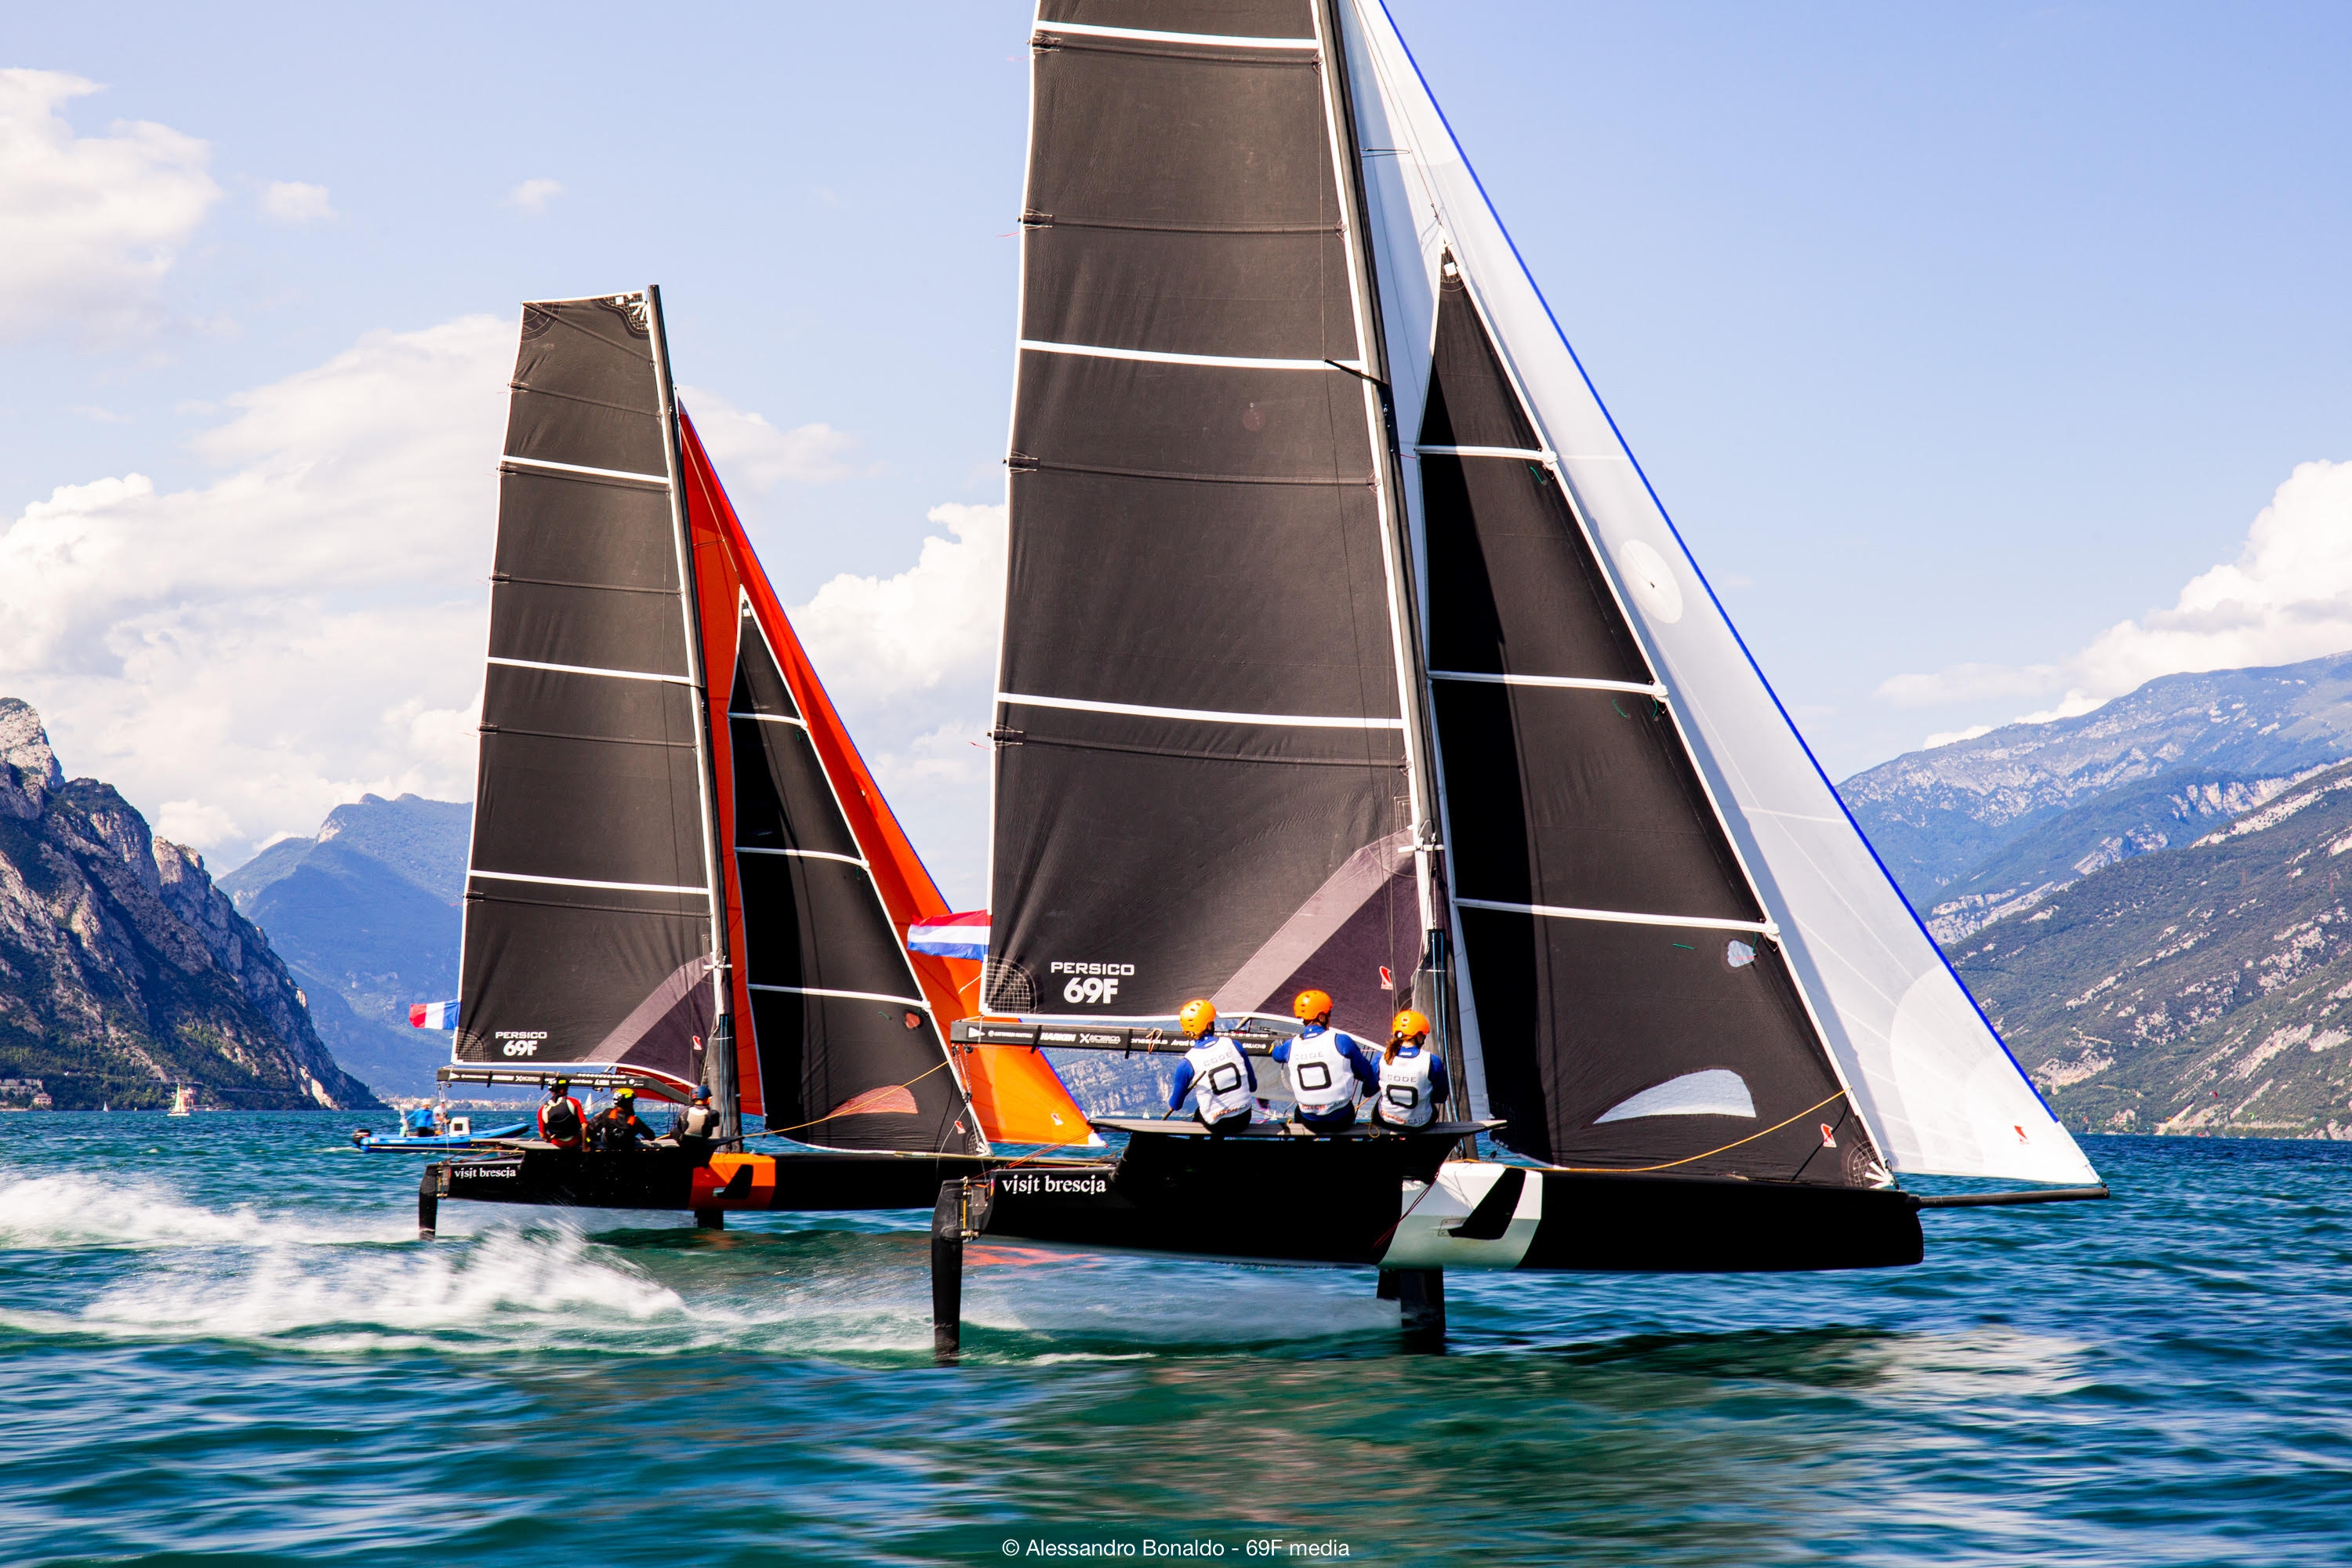  Persico 69  Youth Foiling GoldCup 2021  Act 2  Limone ITA  Day 3